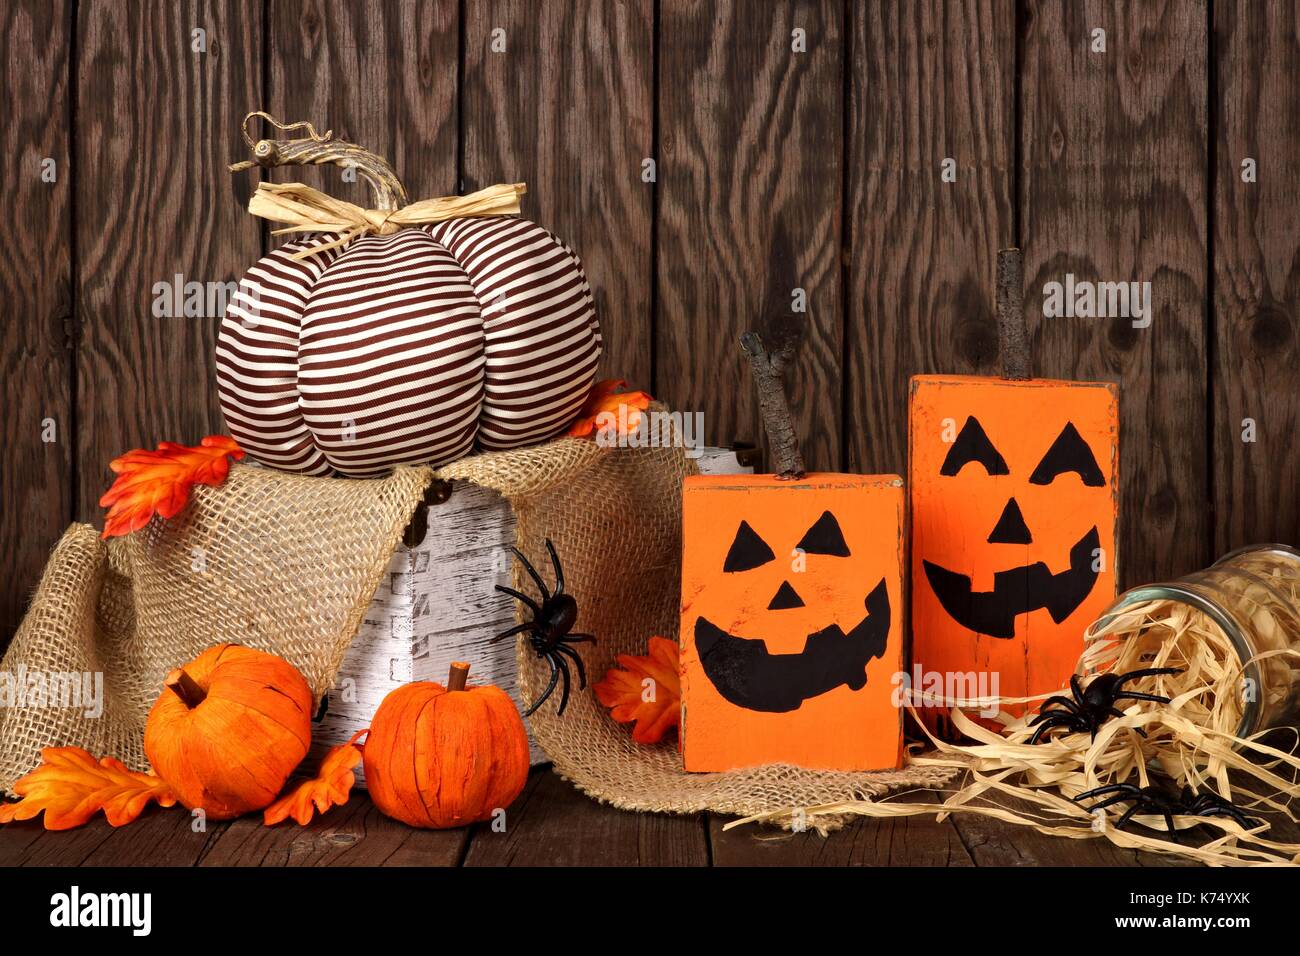 Rustic shabby chic Halloween decor against an old wood background ...